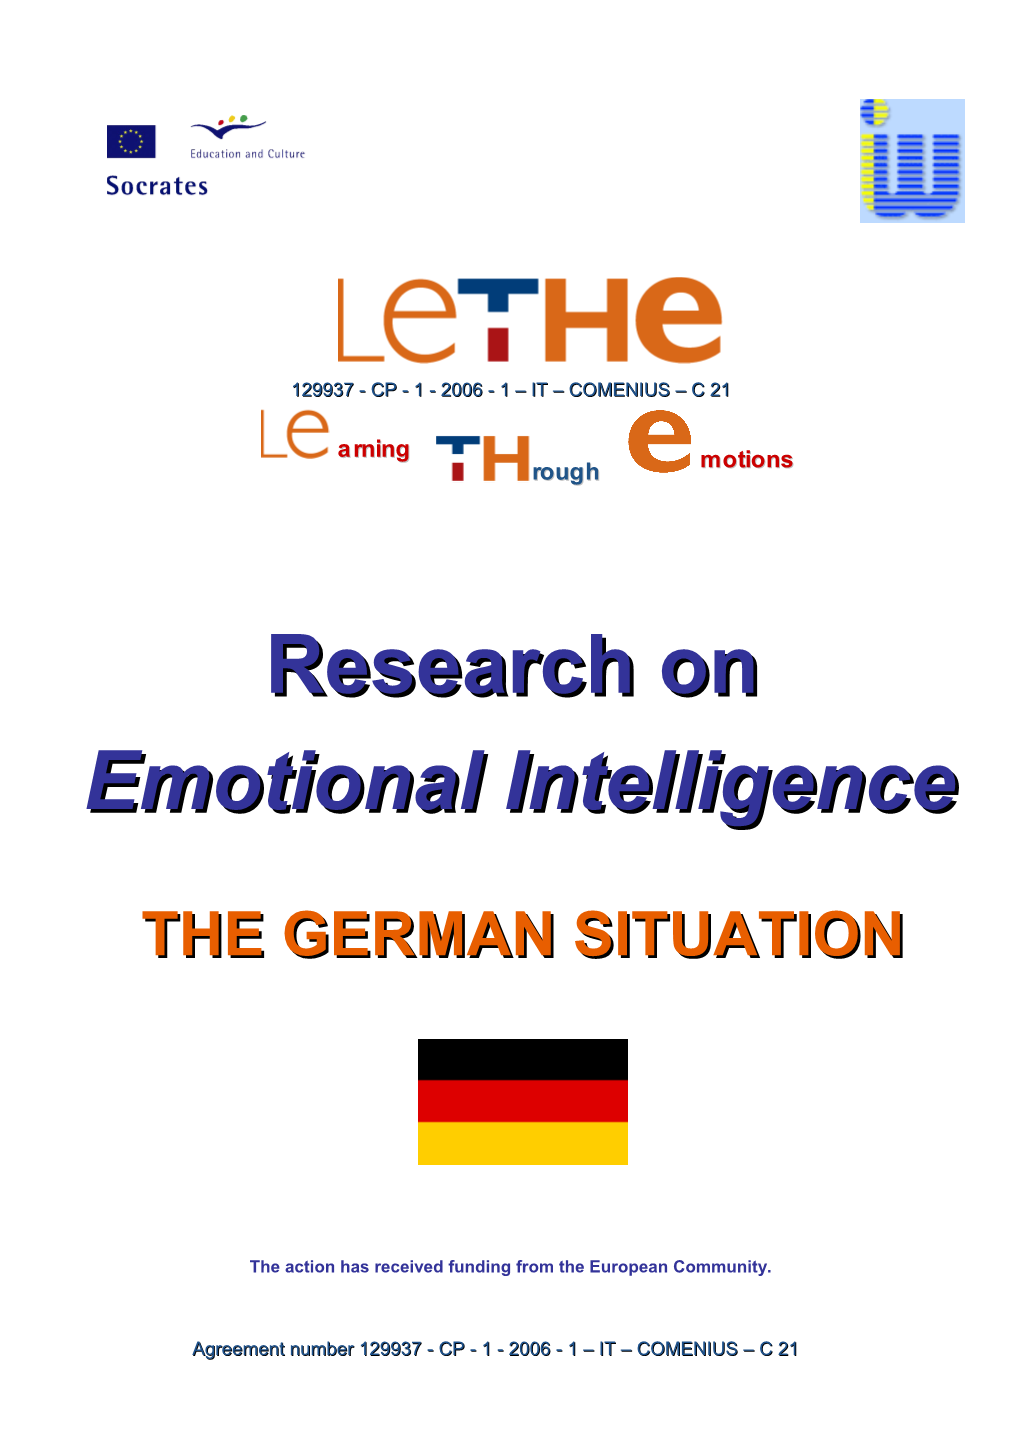 Abstract: German (Saarland) Research